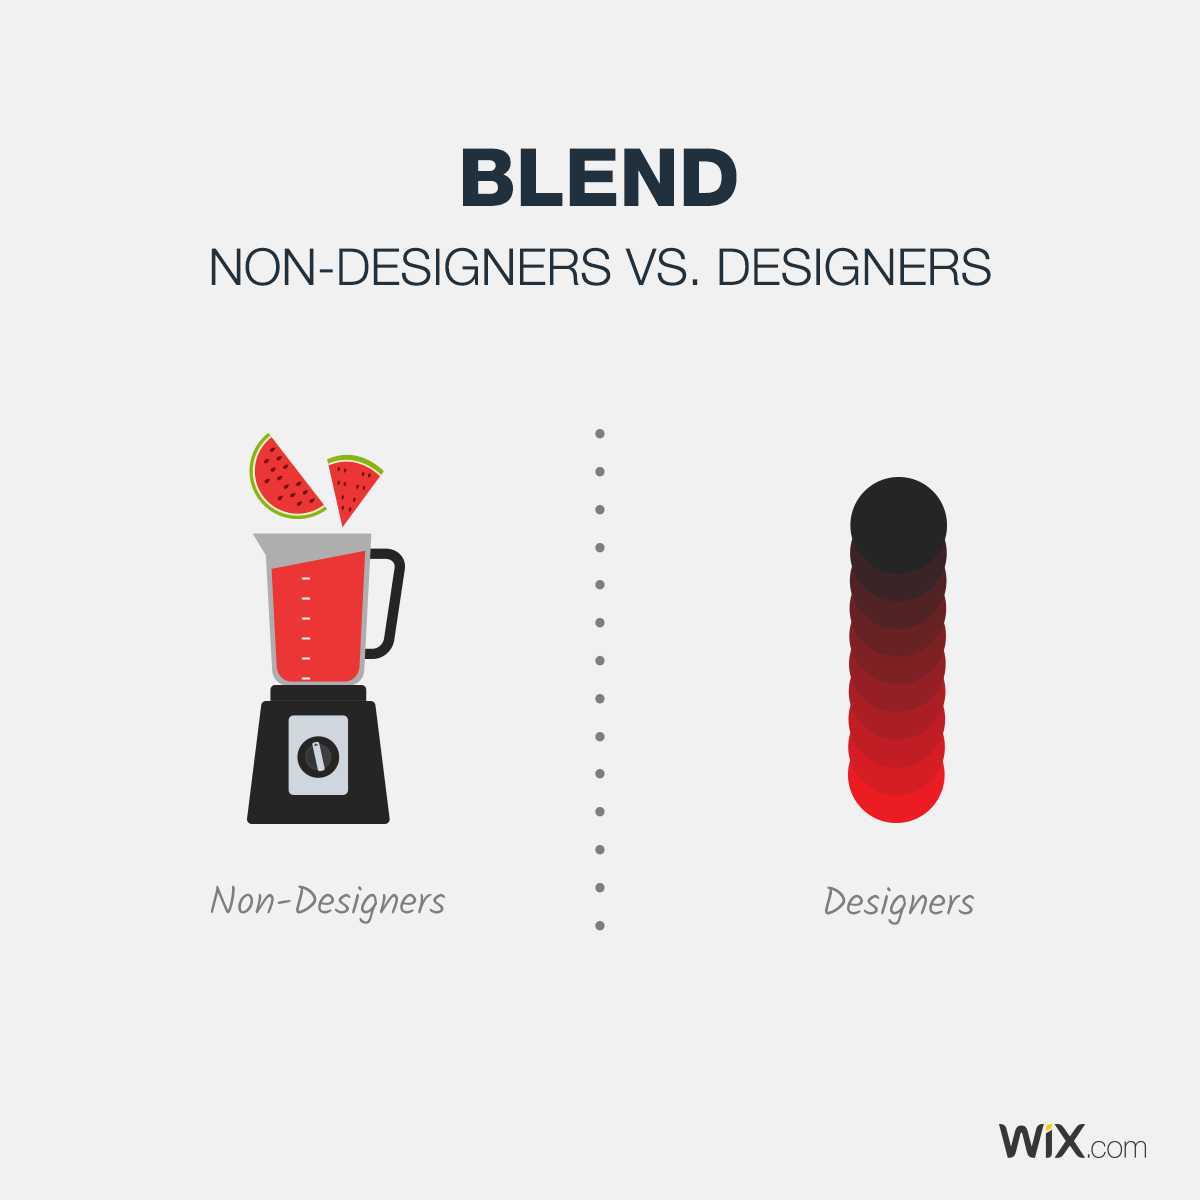 Differences Between Designers and Non-Designers - Blend